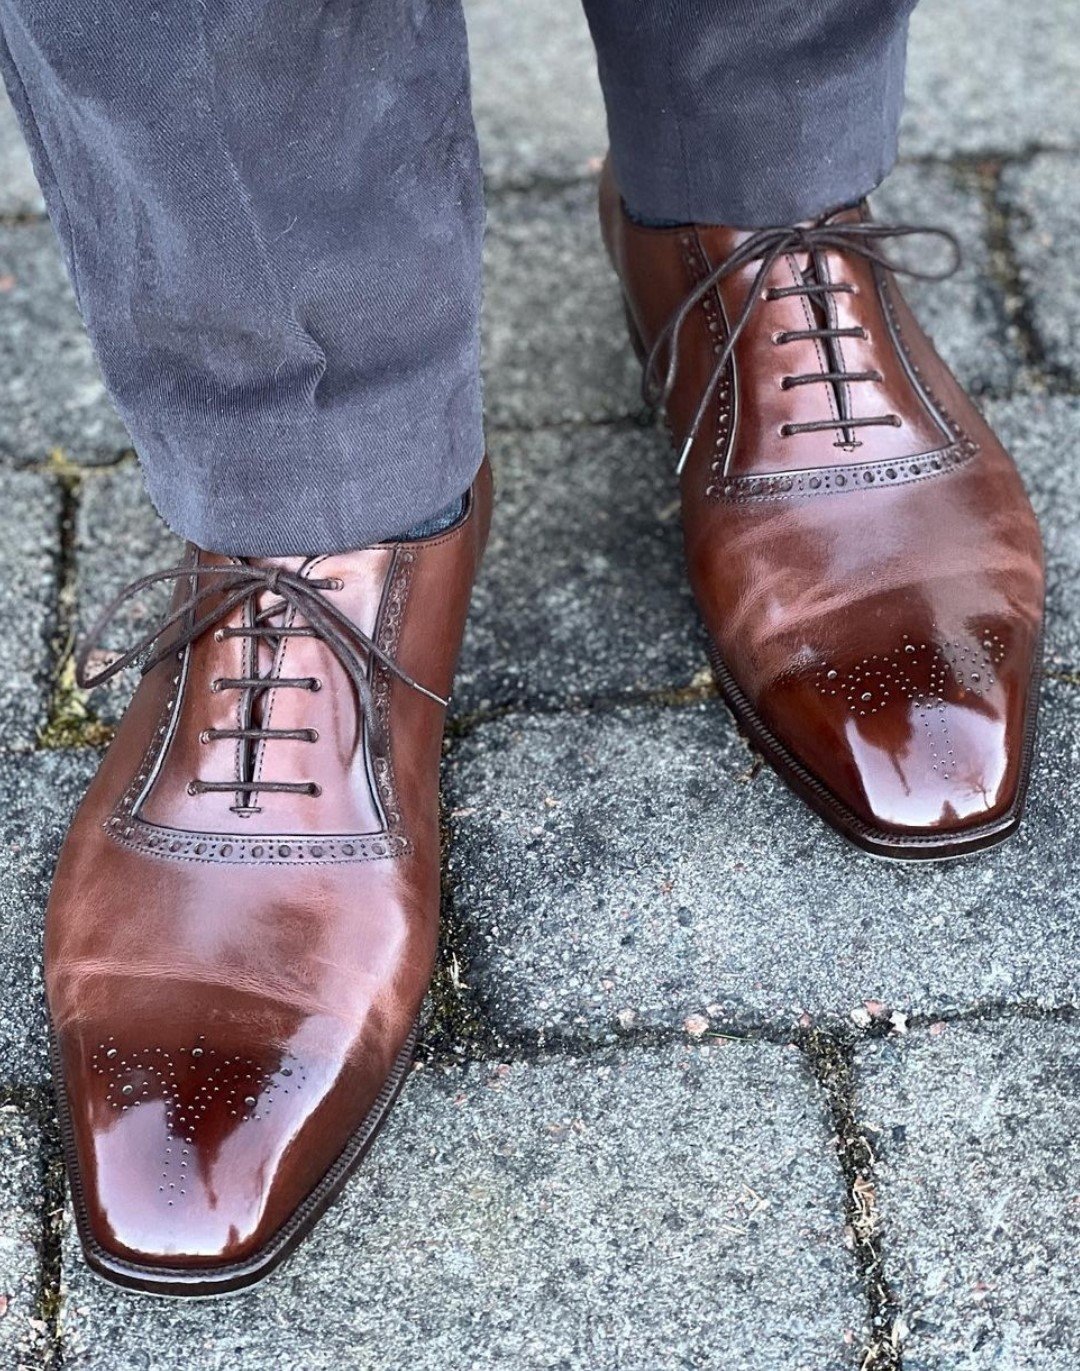 Good Leather Creases - A Lot!